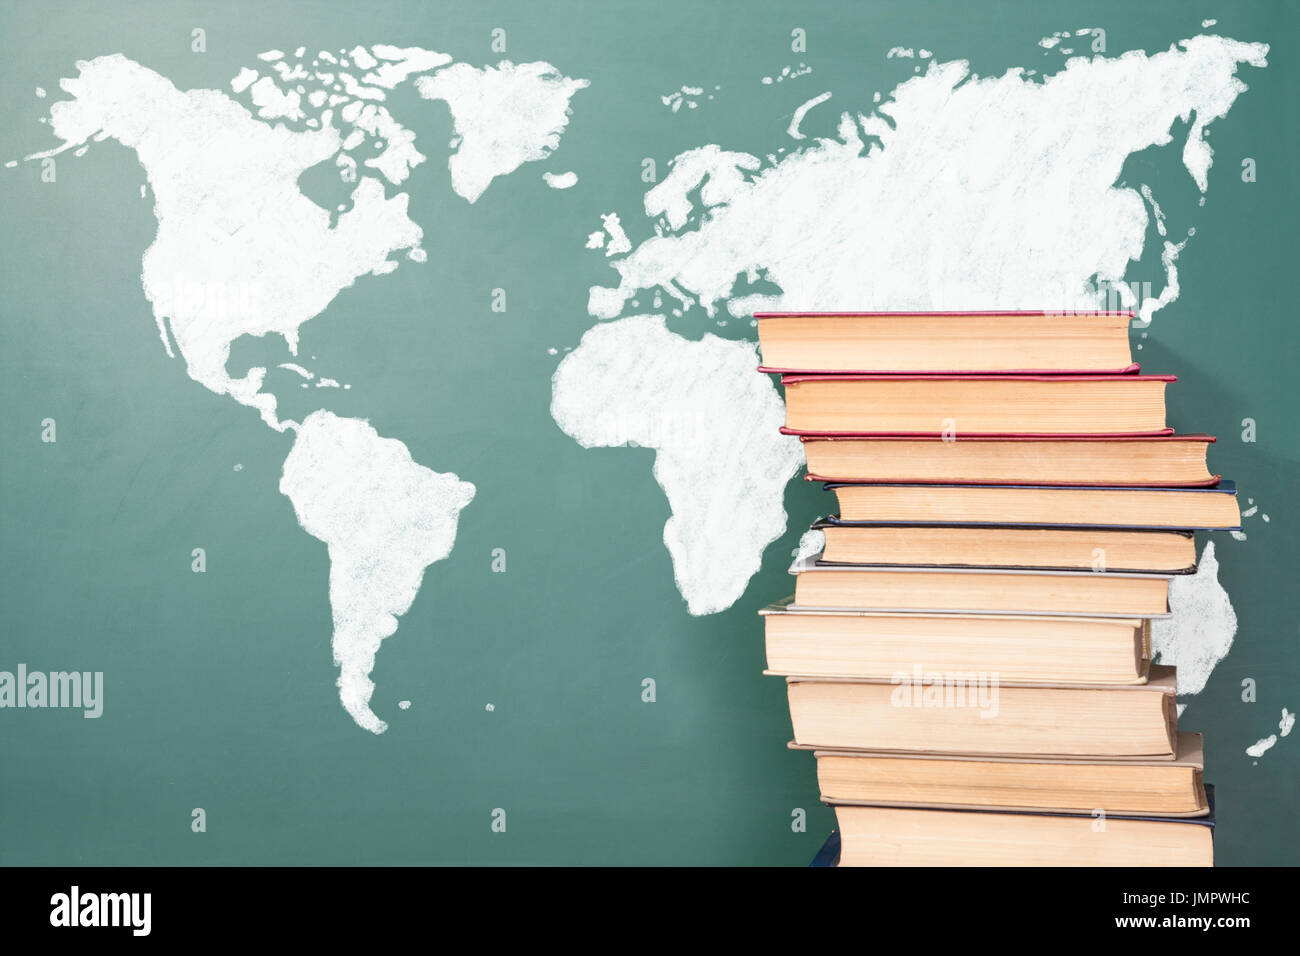 Books and chalk drawing of World map Stock Photo